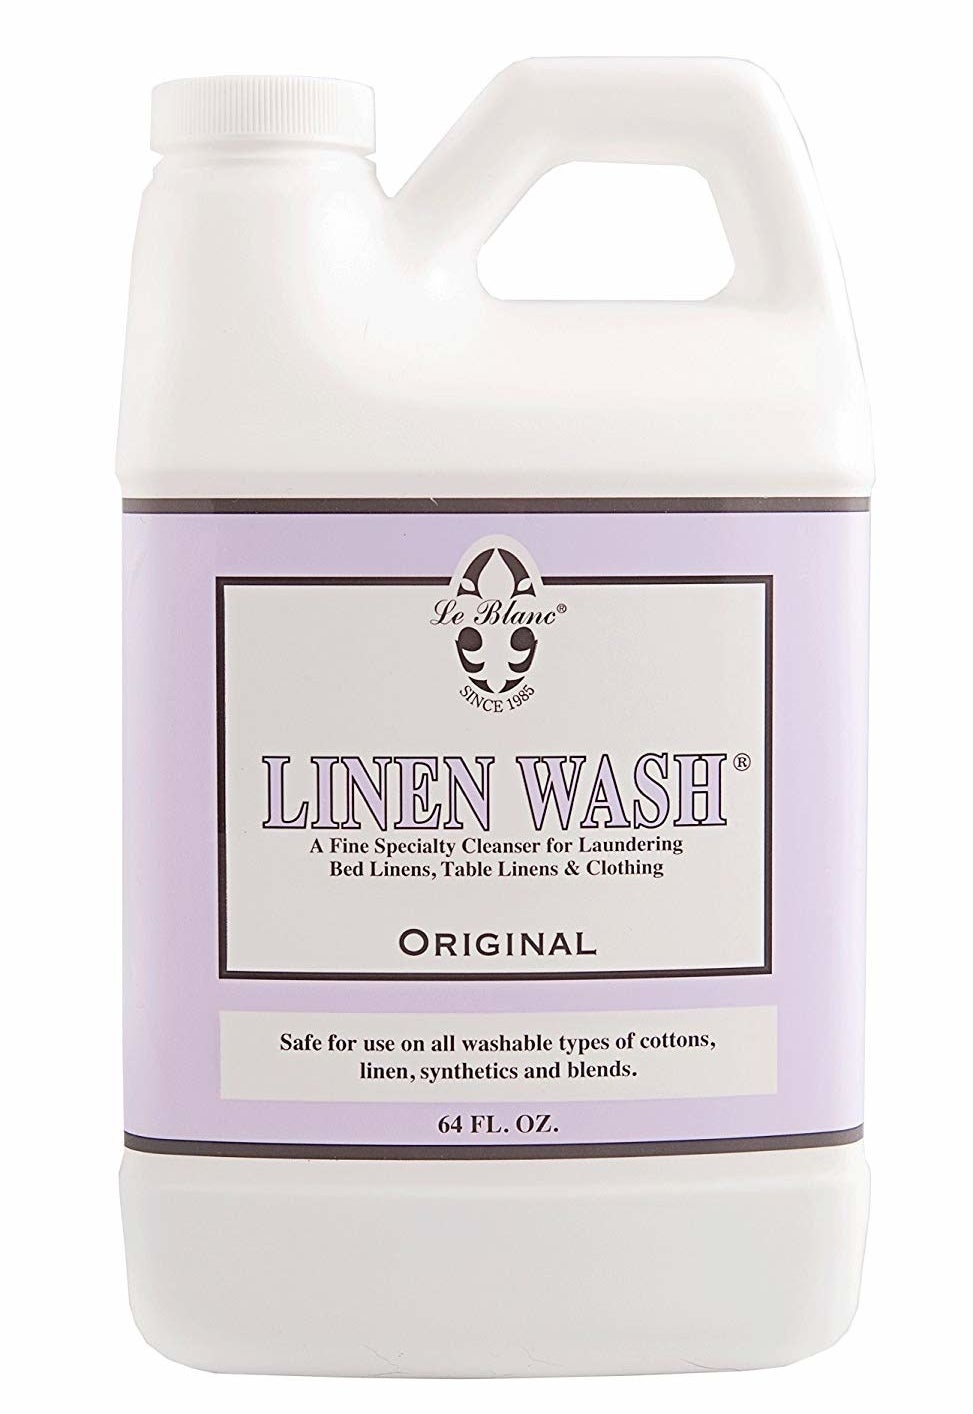 The bottle of the linen wash